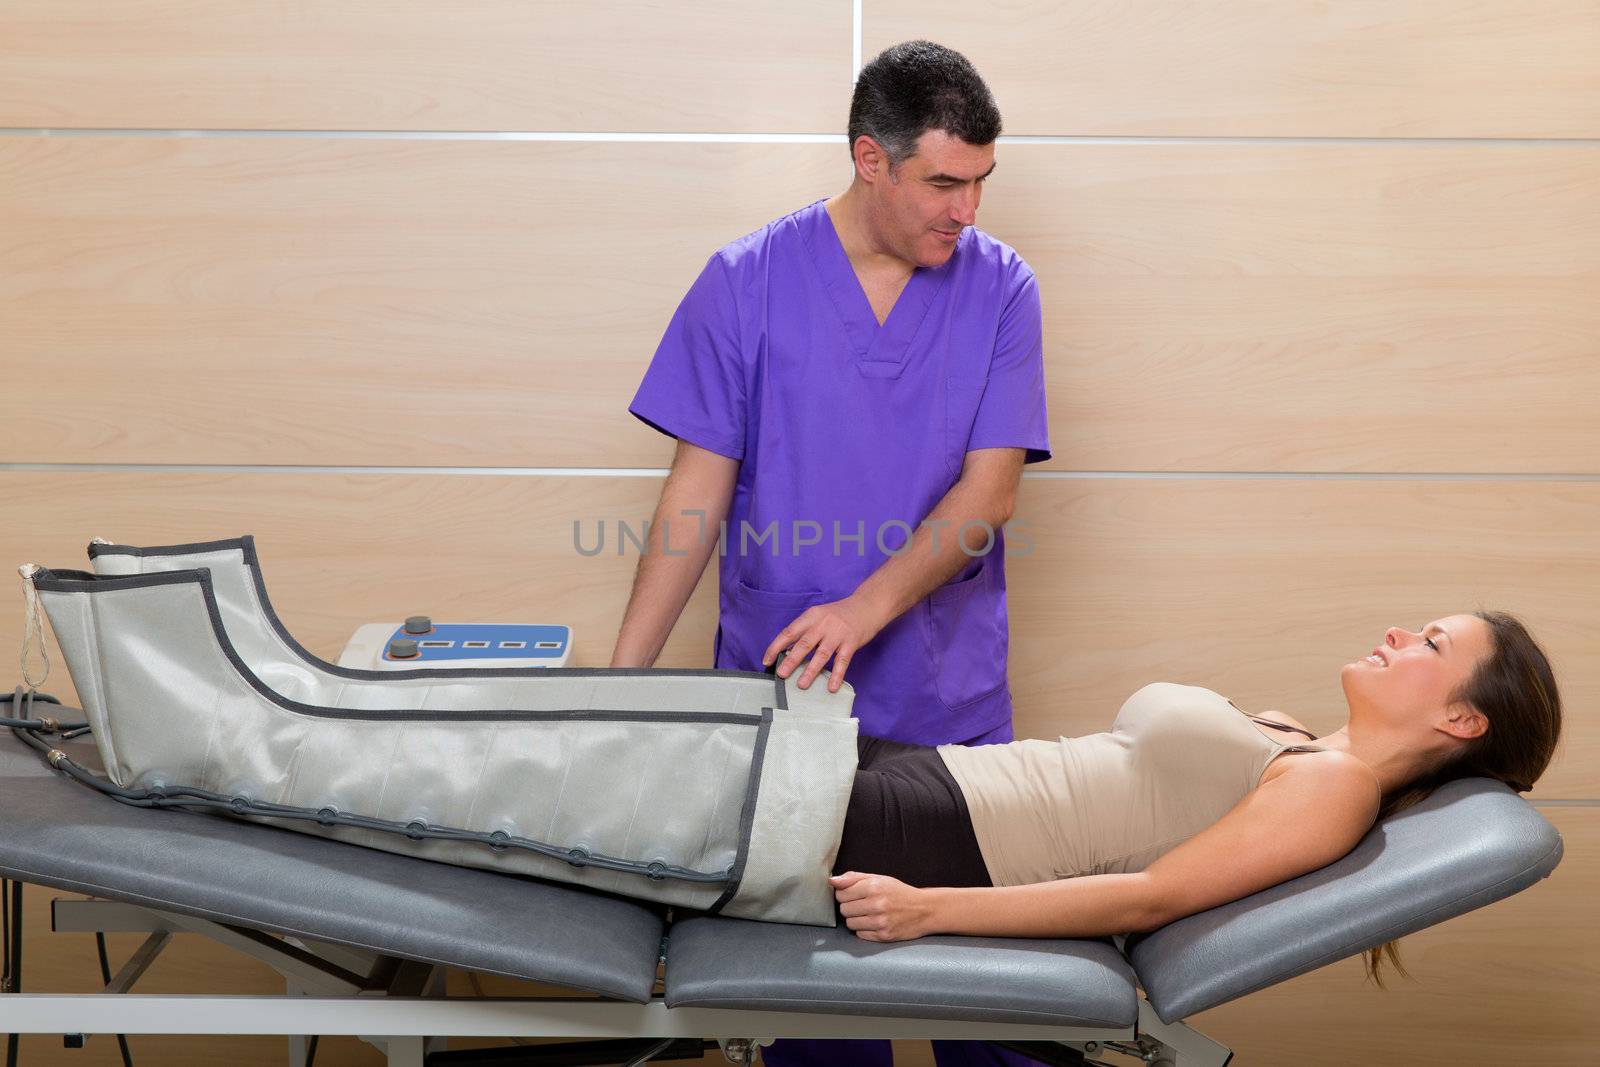 Doctor checking legs pressotherapy machine on woman by lunamarina